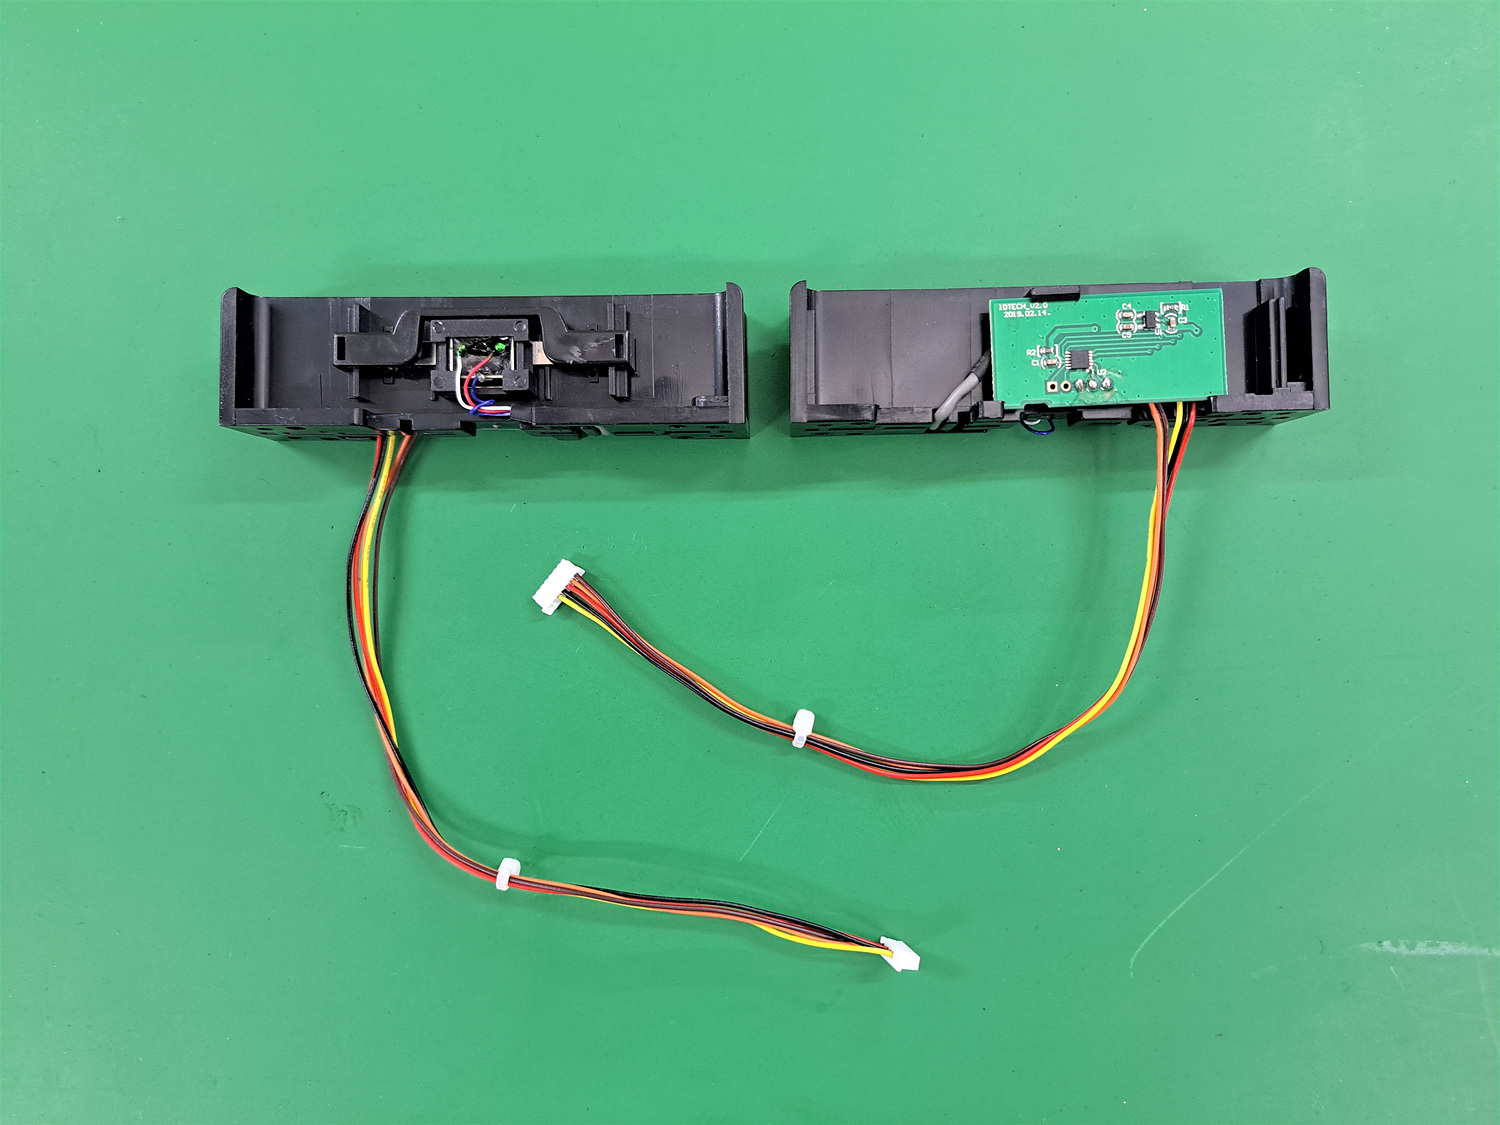 Card Reader with PCB (JSR1220-17)